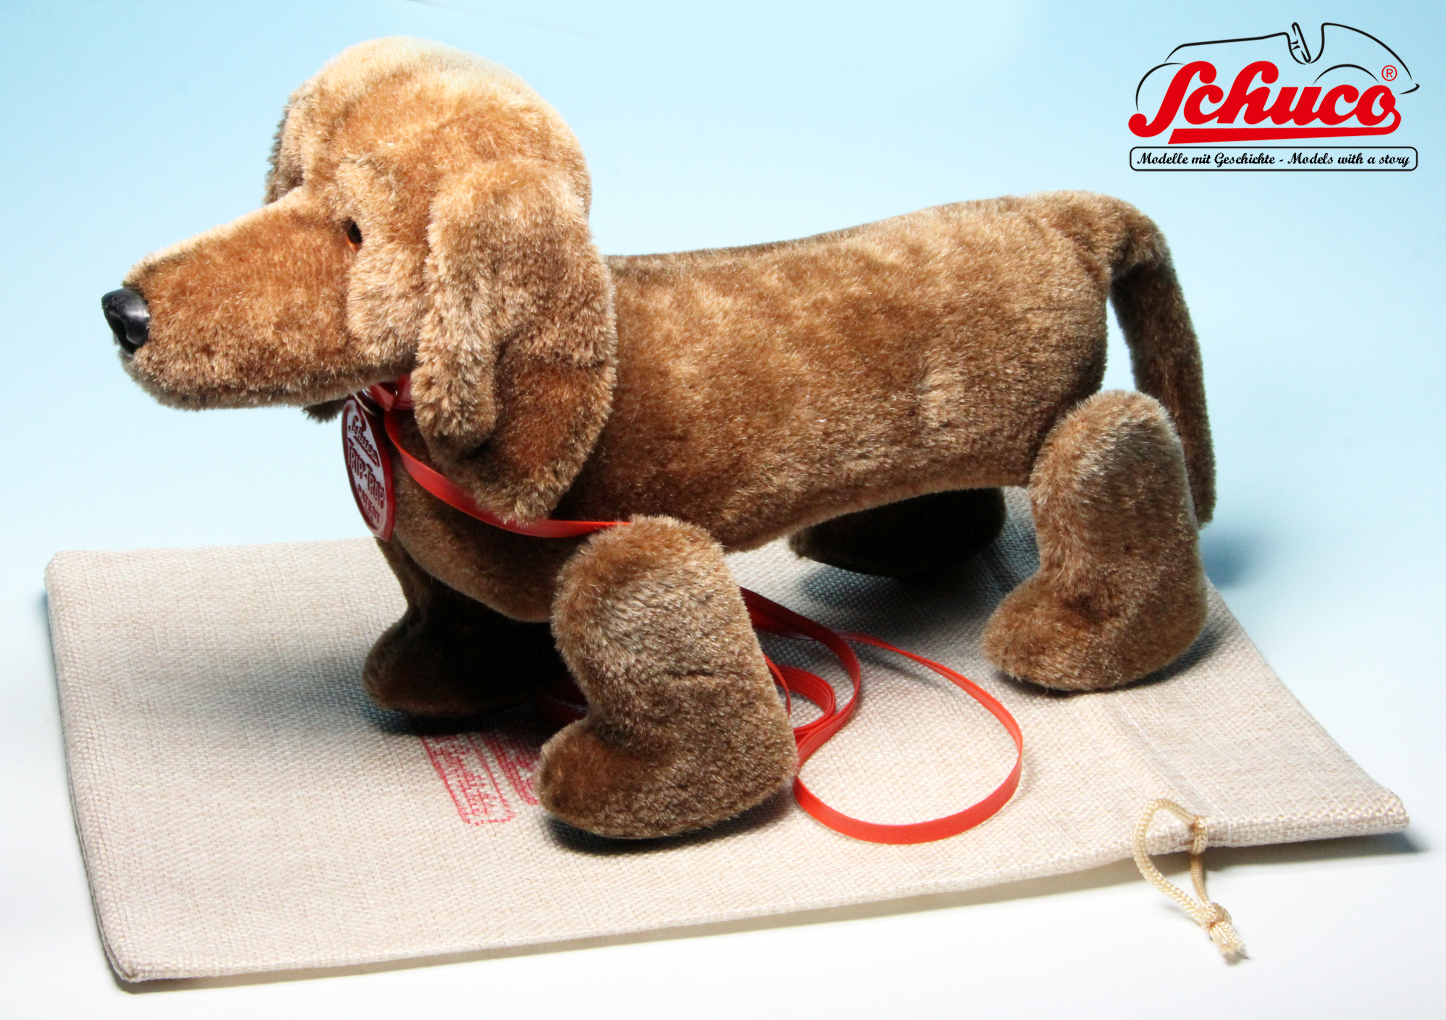 Trip-Trap Dog Dachshund | Models with a | Classic Tin Toys | Schuco | Peter Nasshan Modellautos